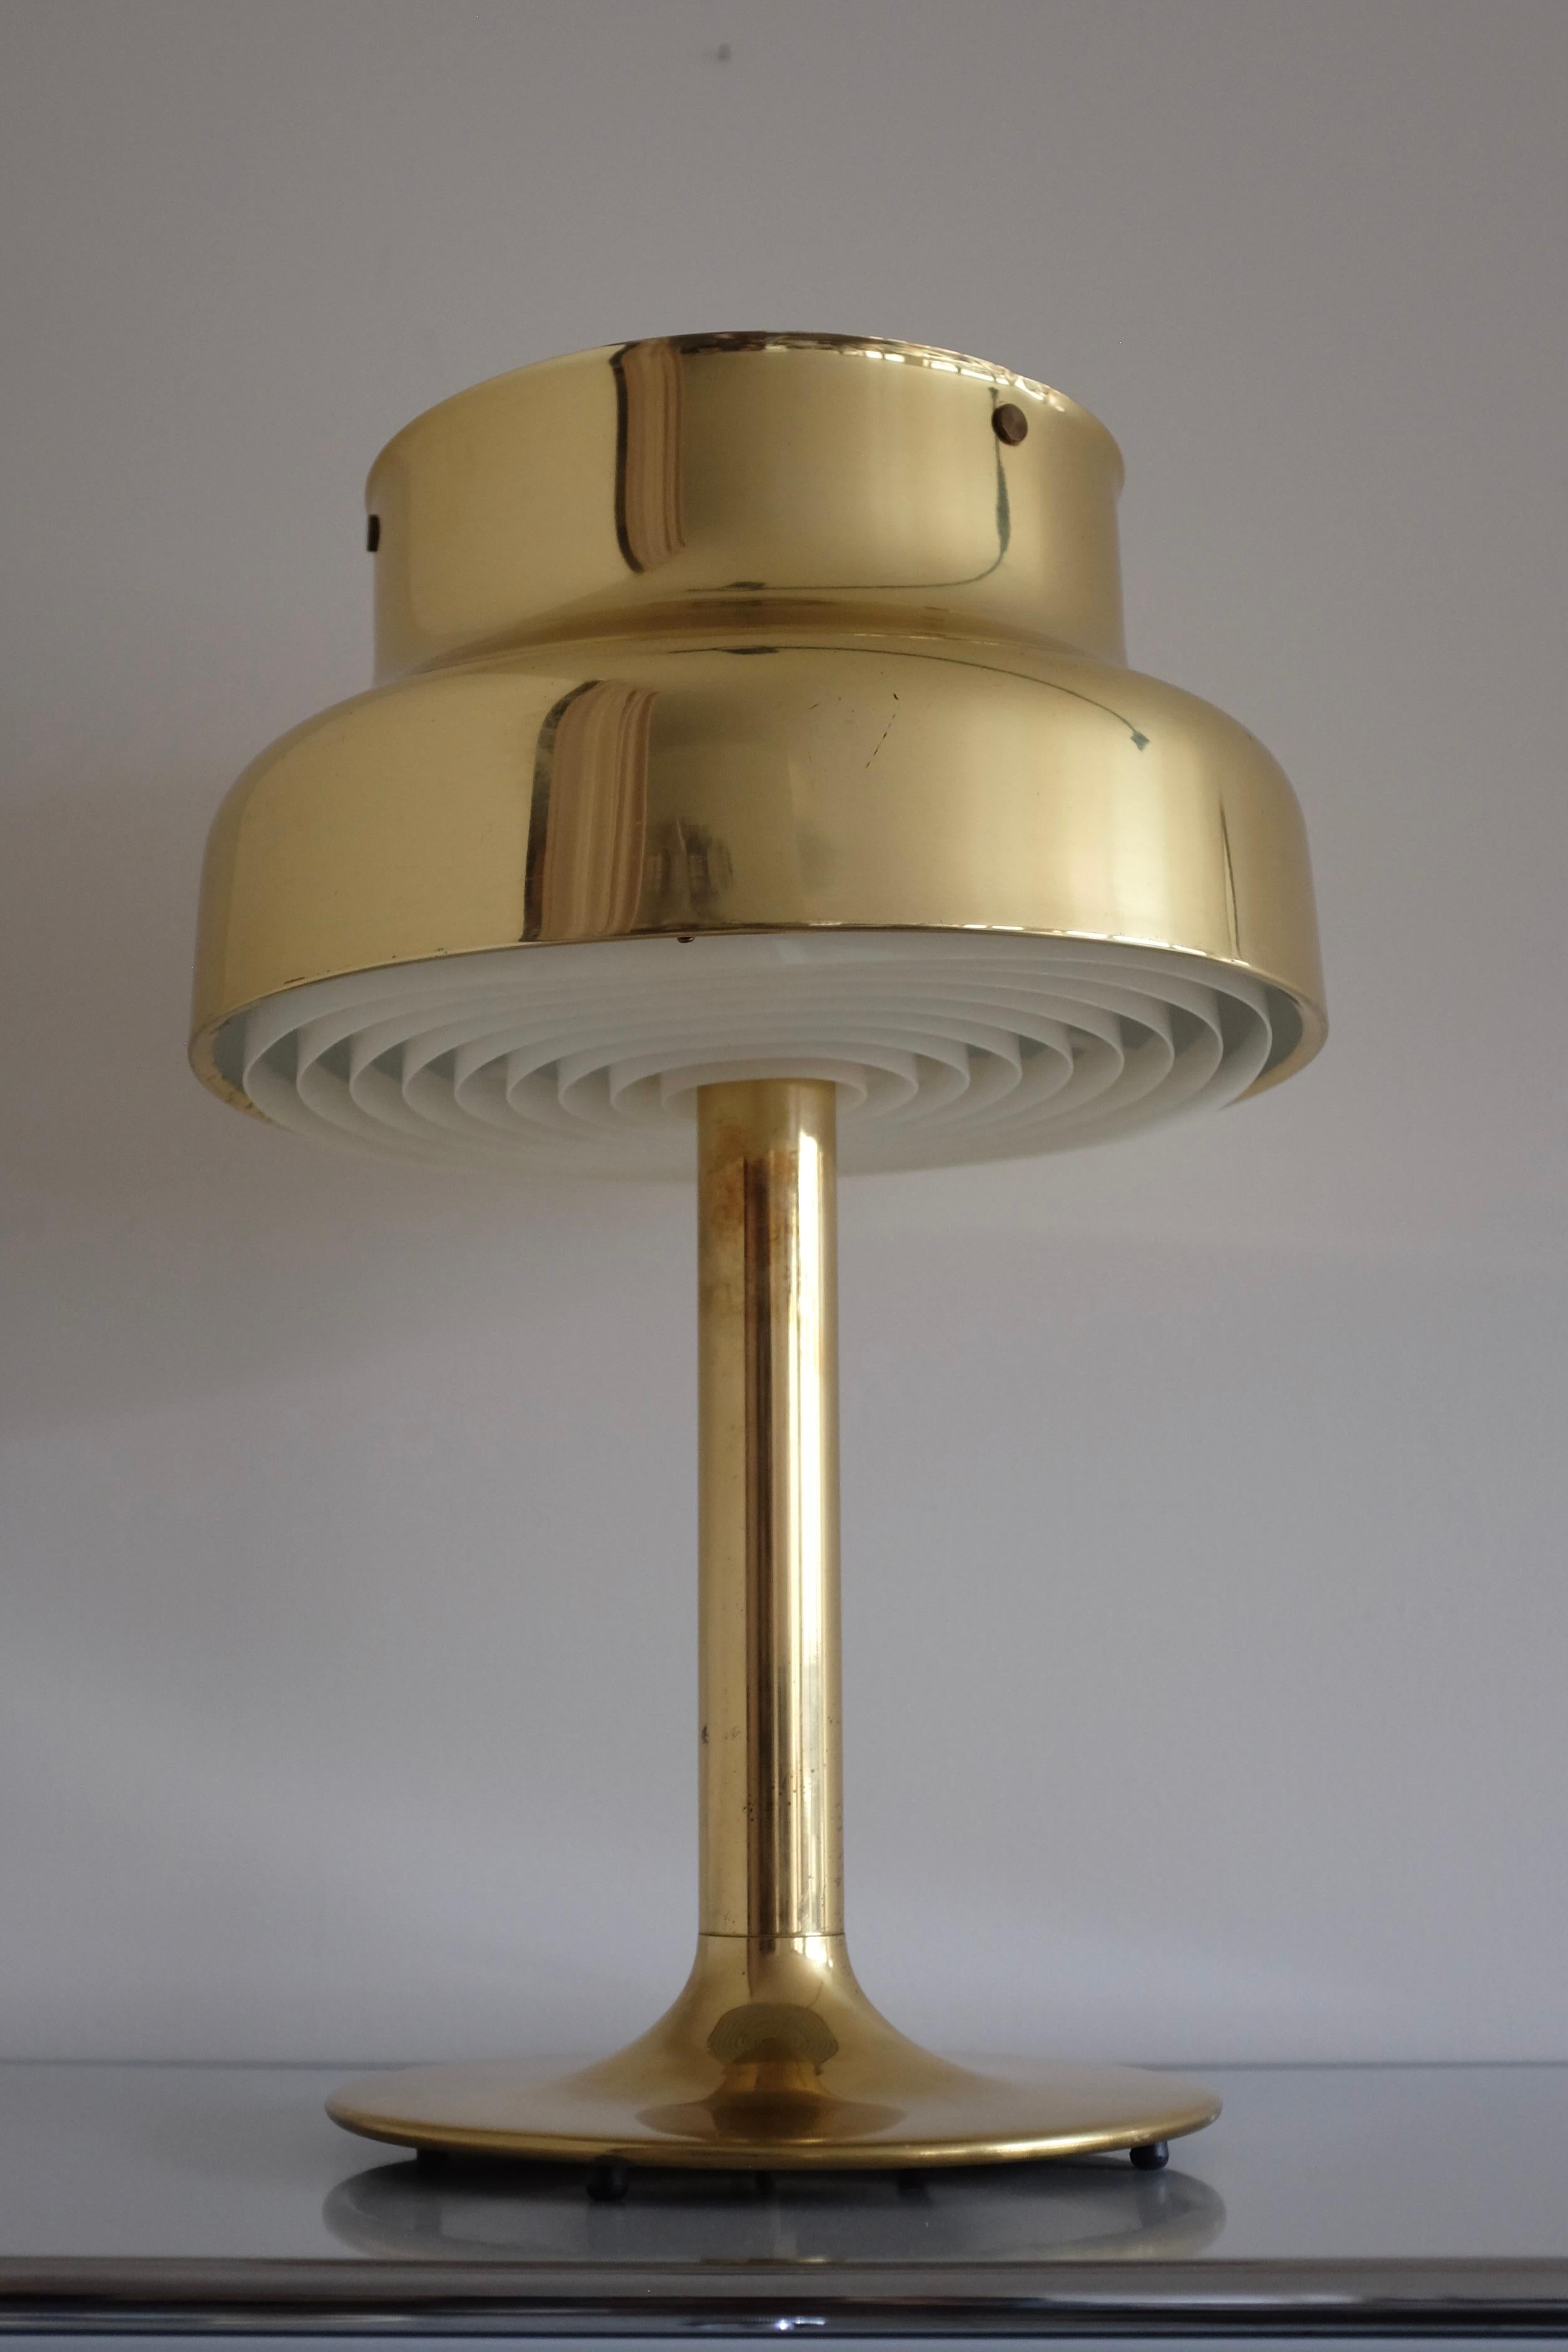 Iconic Bumlingen table lamp by Anders Pehrson for Ateljé Lyktan, Sweden. Large Brass lamp with rounded design original designed in 1968. Age appropriate wear with patine to the brass and a small buckle to the top edge of the shade (please see